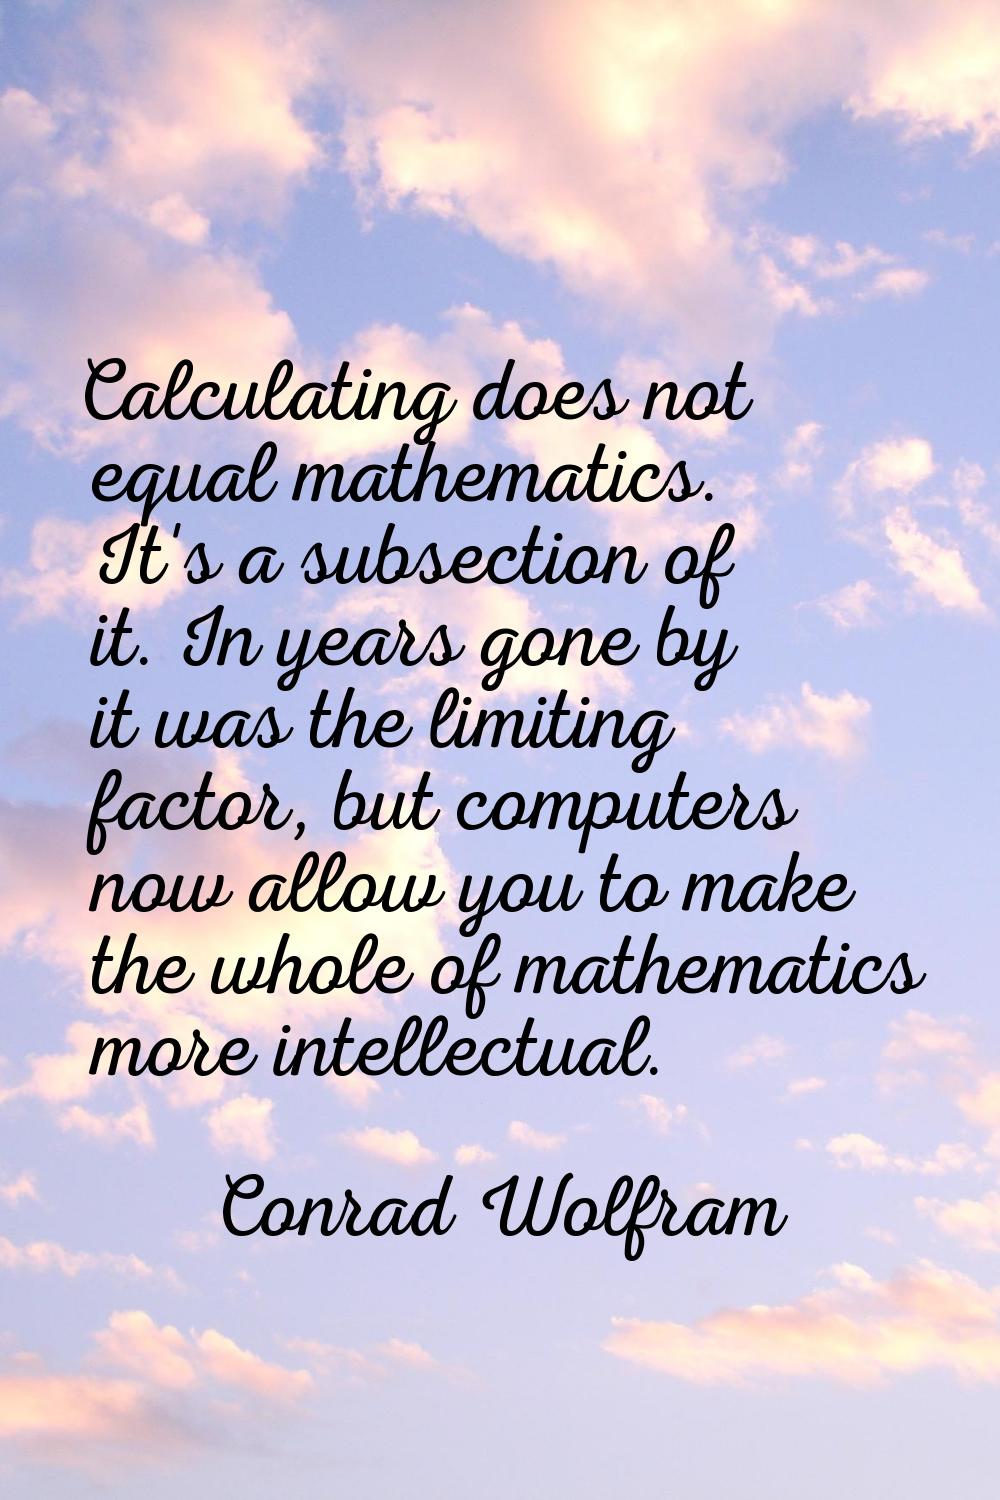 Calculating does not equal mathematics. It's a subsection of it. In years gone by it was the limiti